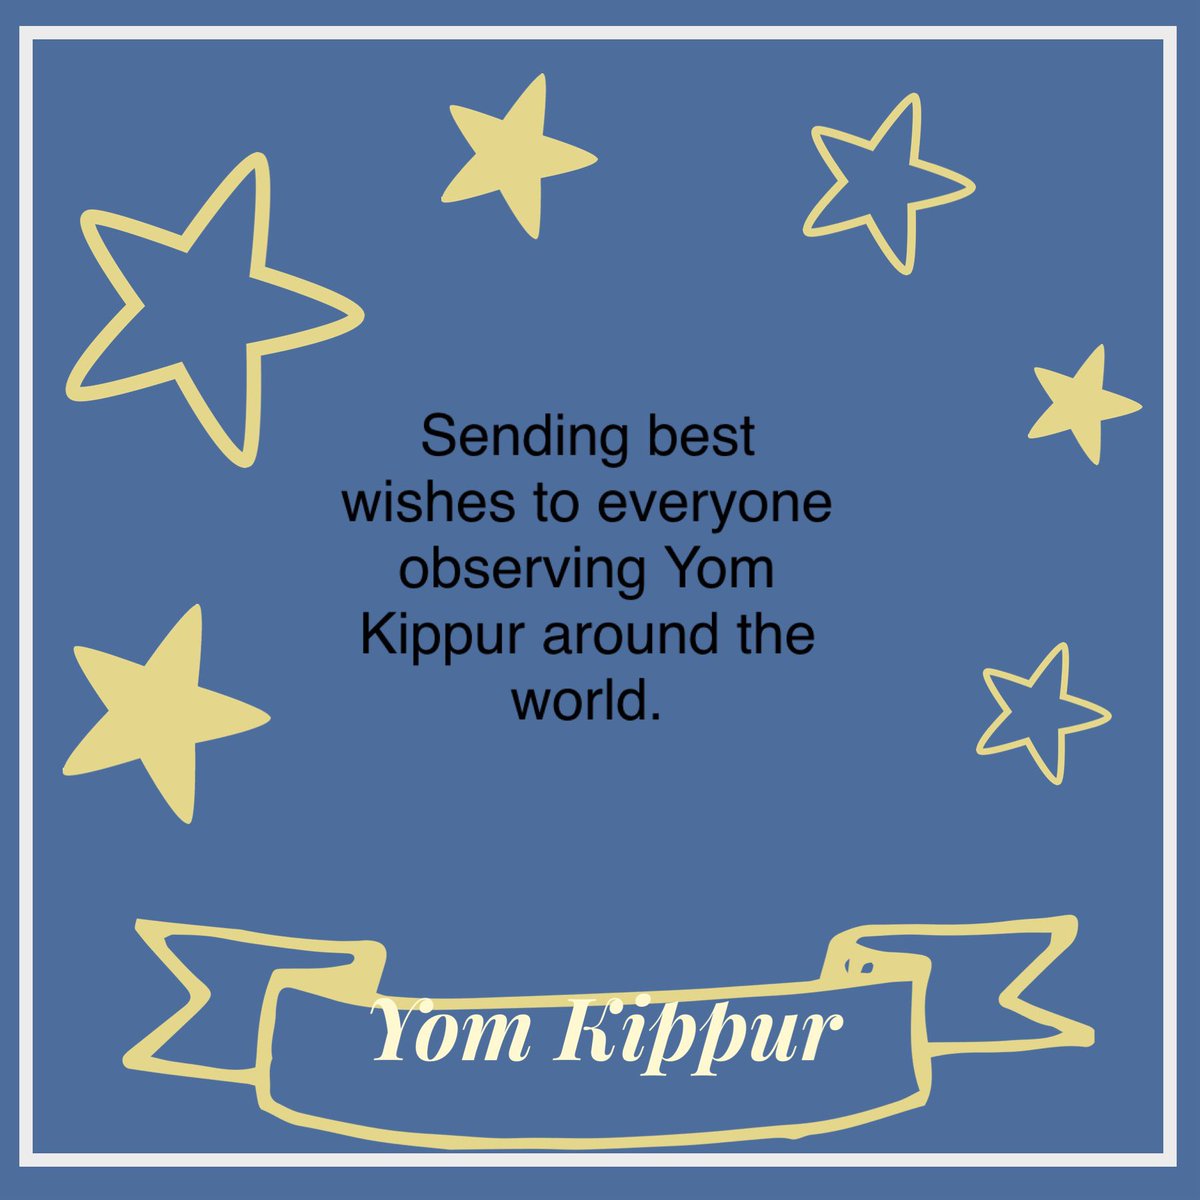 #YomKippur, the Day of Atonement, is the holiest day in the Jewish calendar. And though it is a day of fasting, repentance and self-examination, it is not a sad day, and so it is appropriate to greet people warmly when you meet them. 
G’mar chatima tovah!